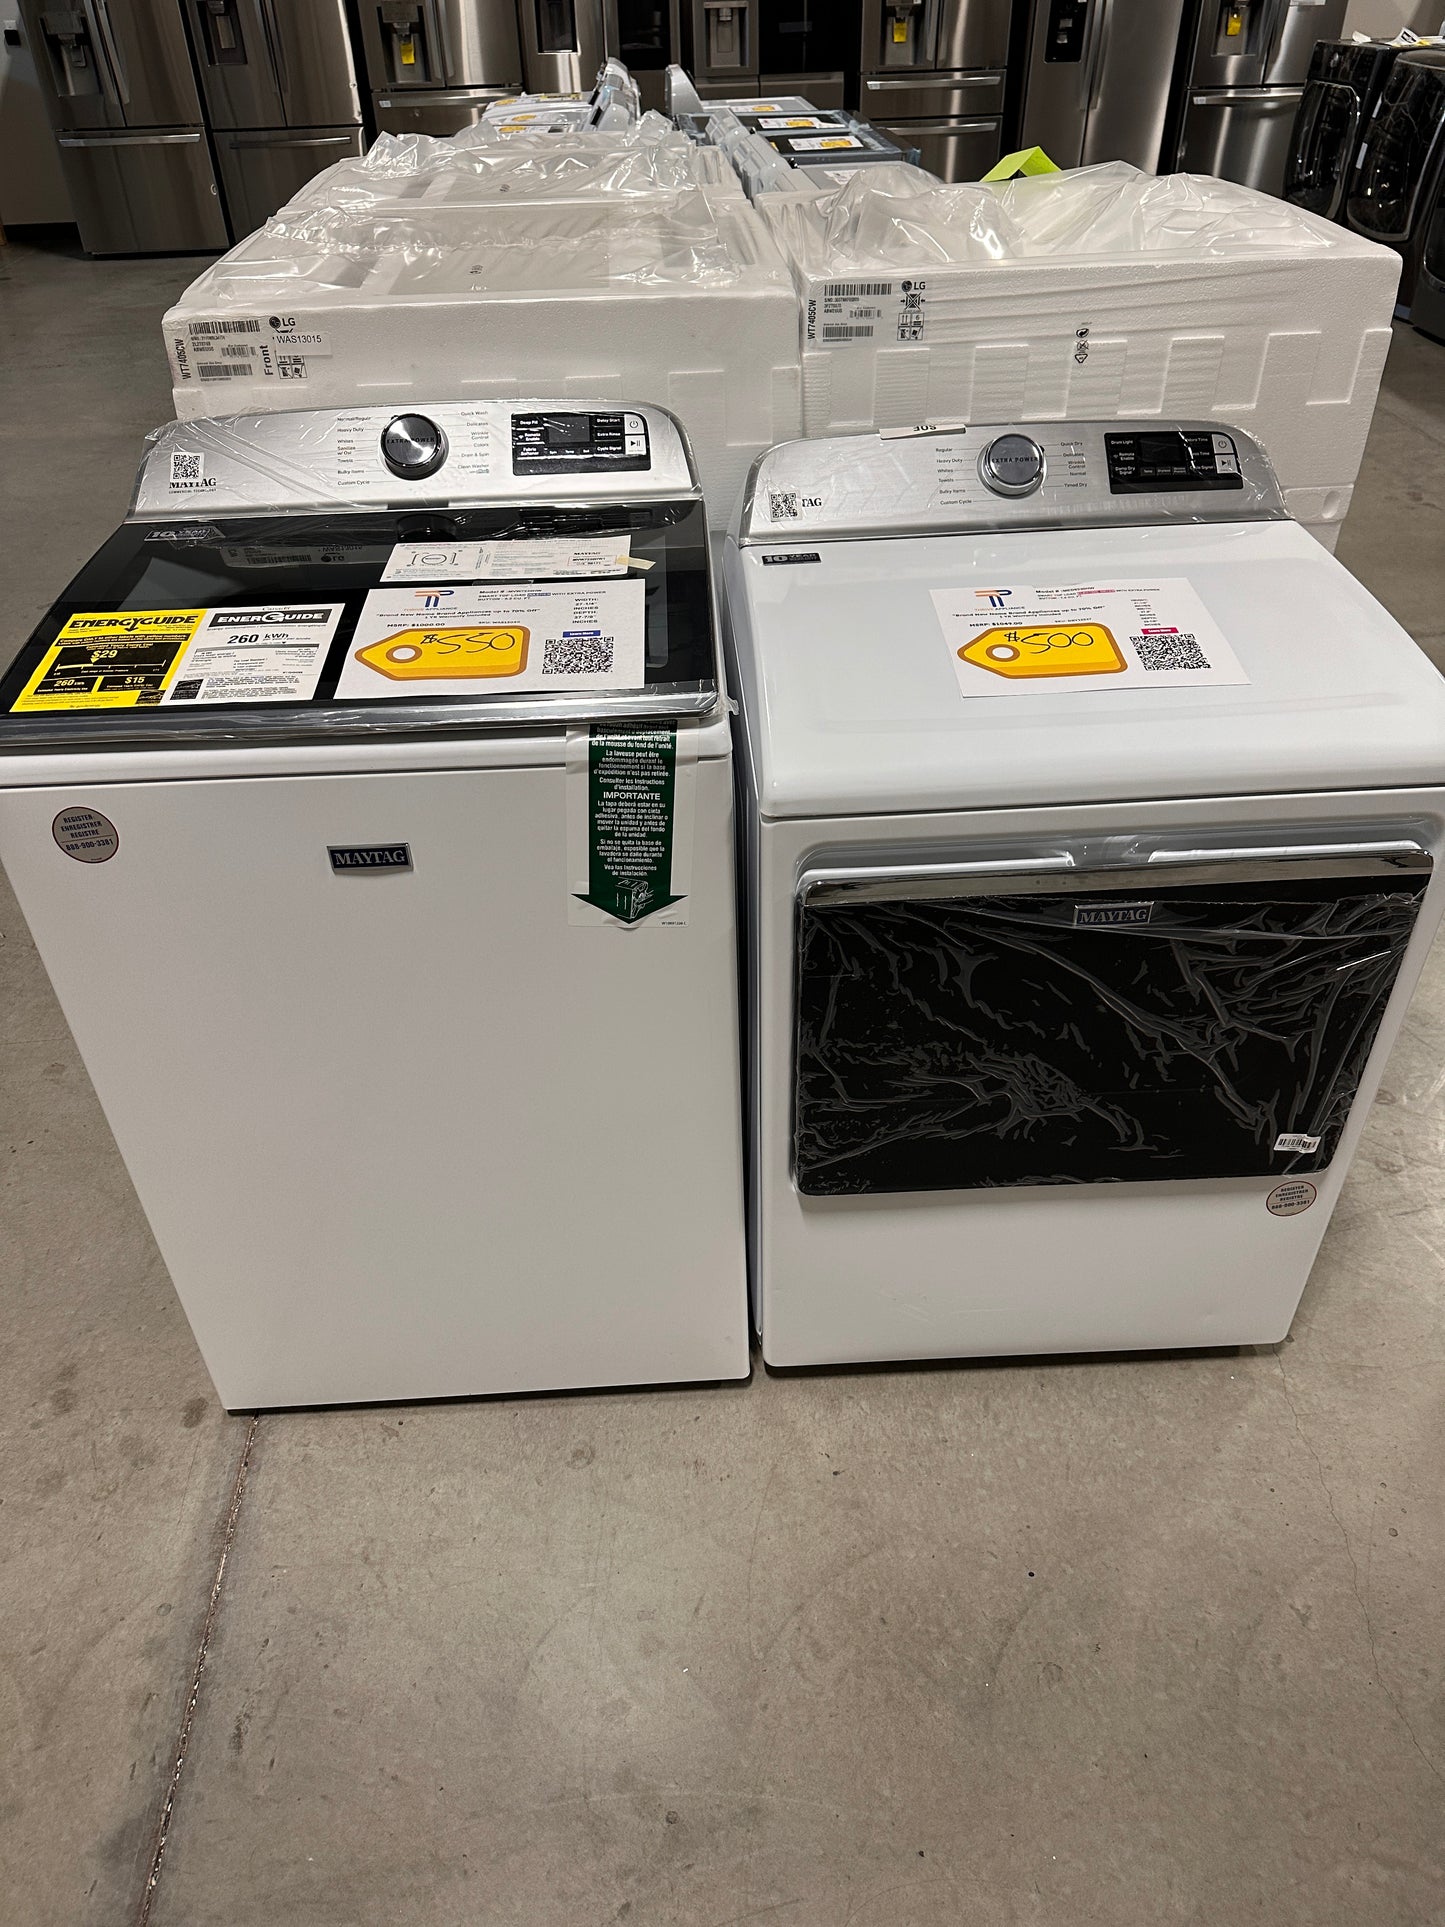 GREAT NEW SMART LAUNDRY SET - WAS13039 DRY12337